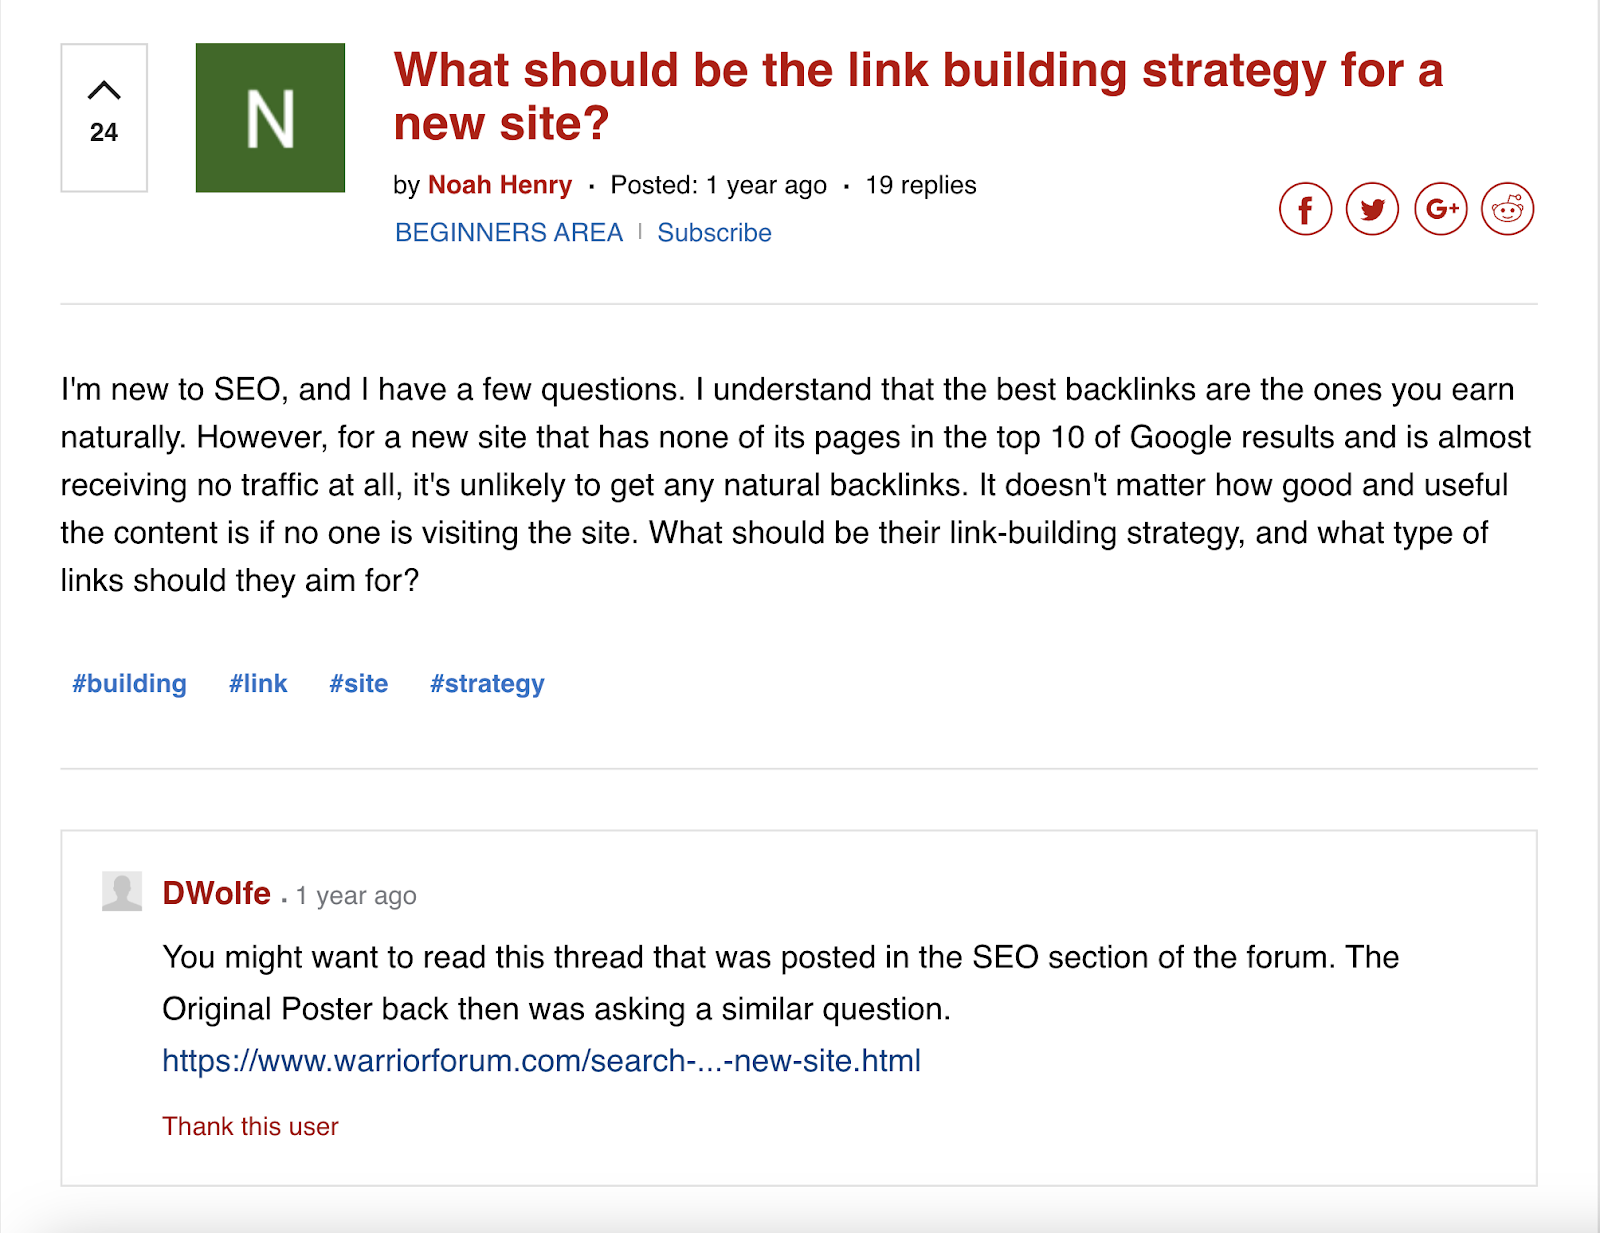 Warrior Forum thread asking what should be the link building strategy for a new site. A reply answers with a link to another, similar thread.